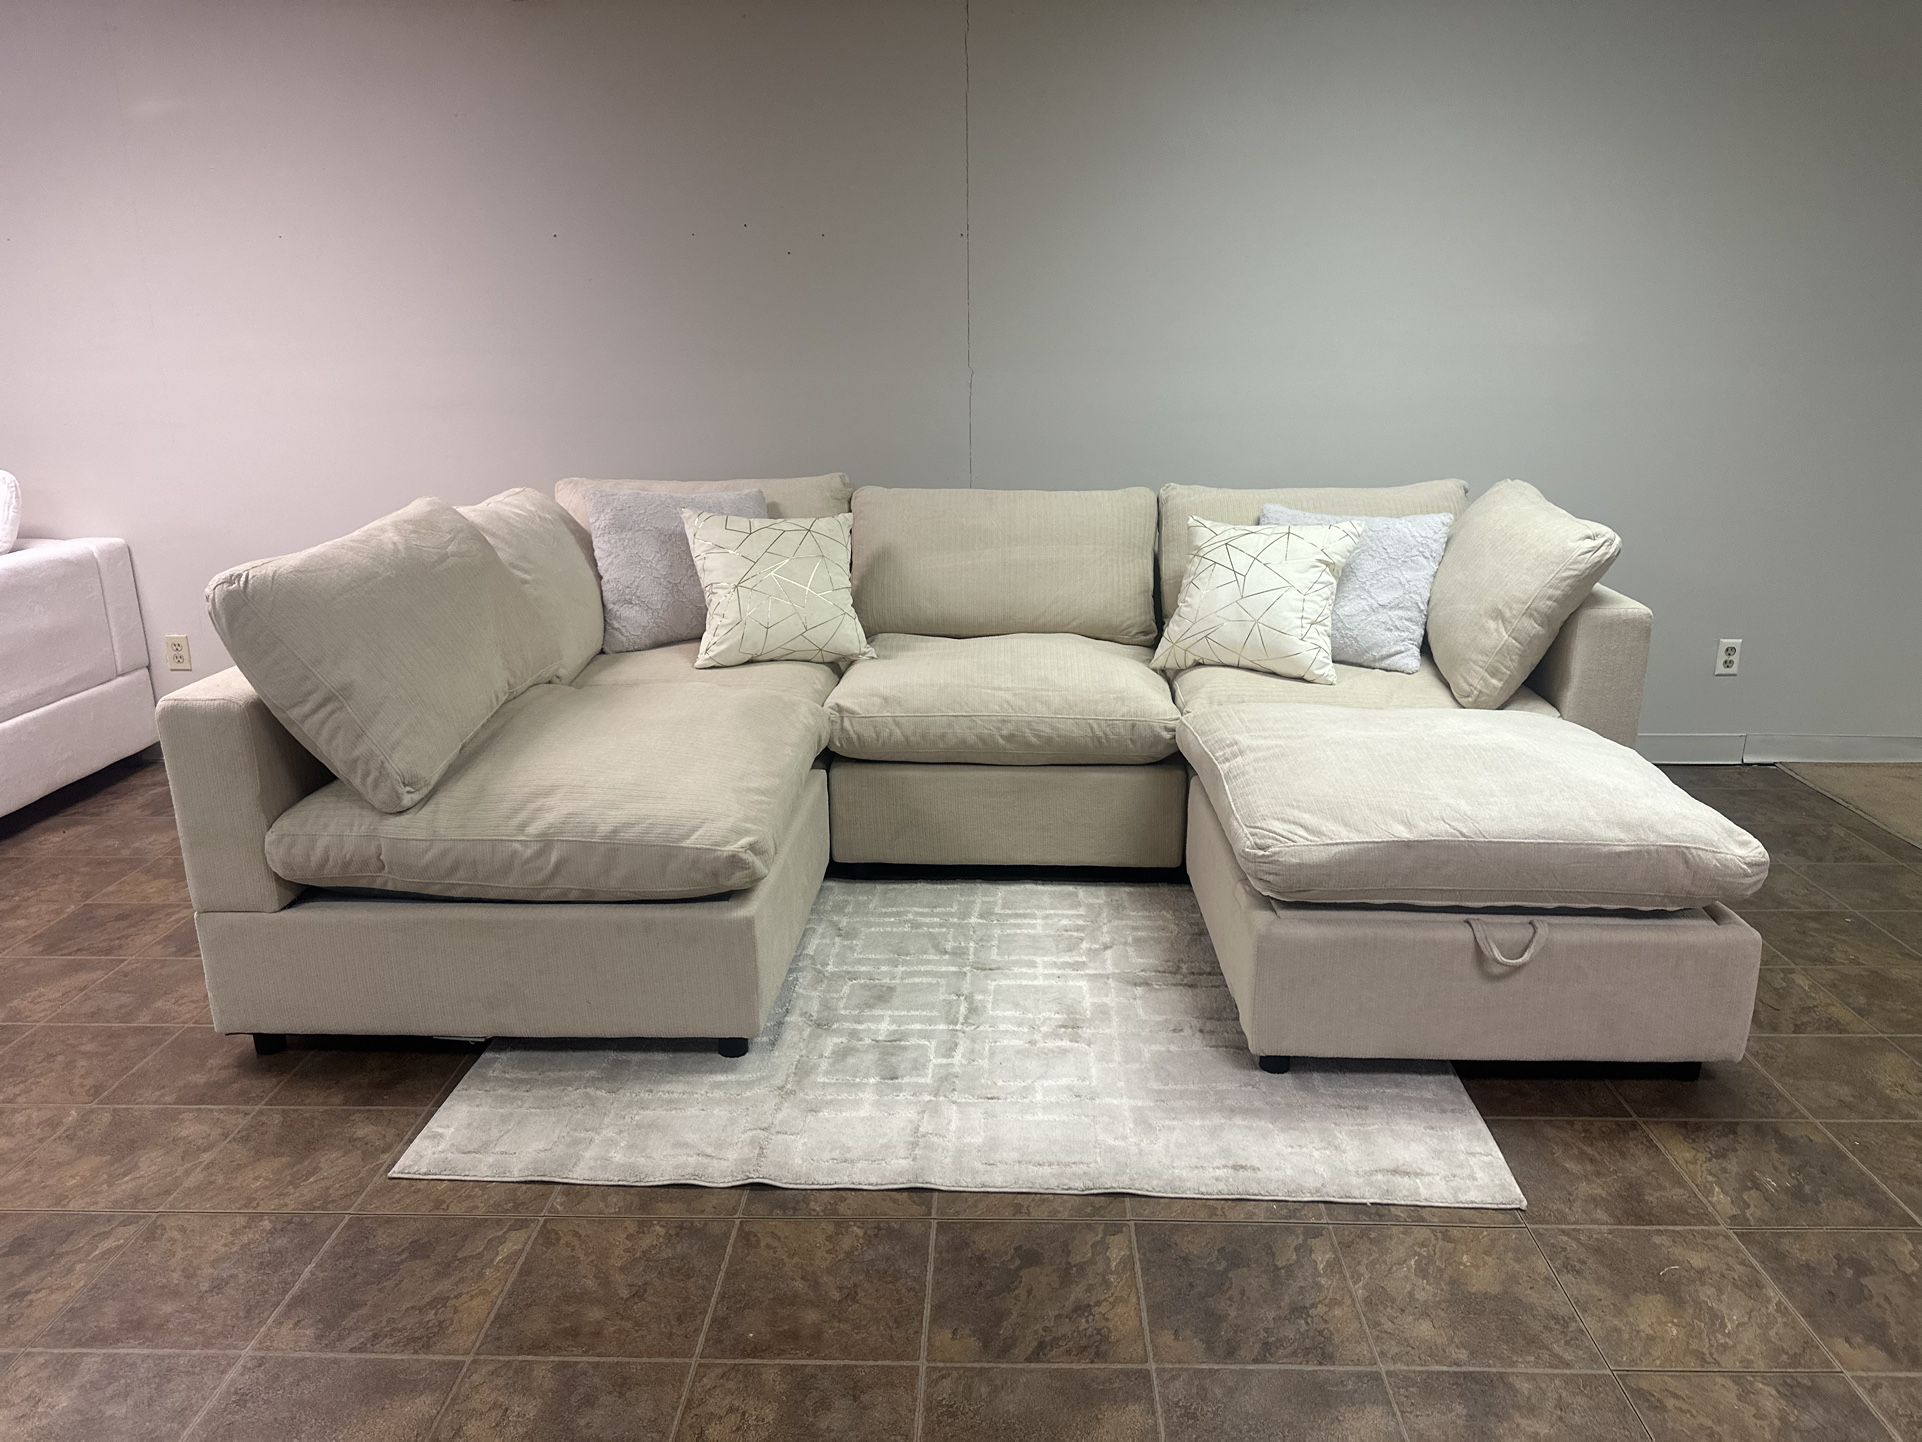 BRAND NEW | Modular Cloud Couch Beige Sectional Sofa Speakers & Storage Ottoman *FREE DELIVERY!*